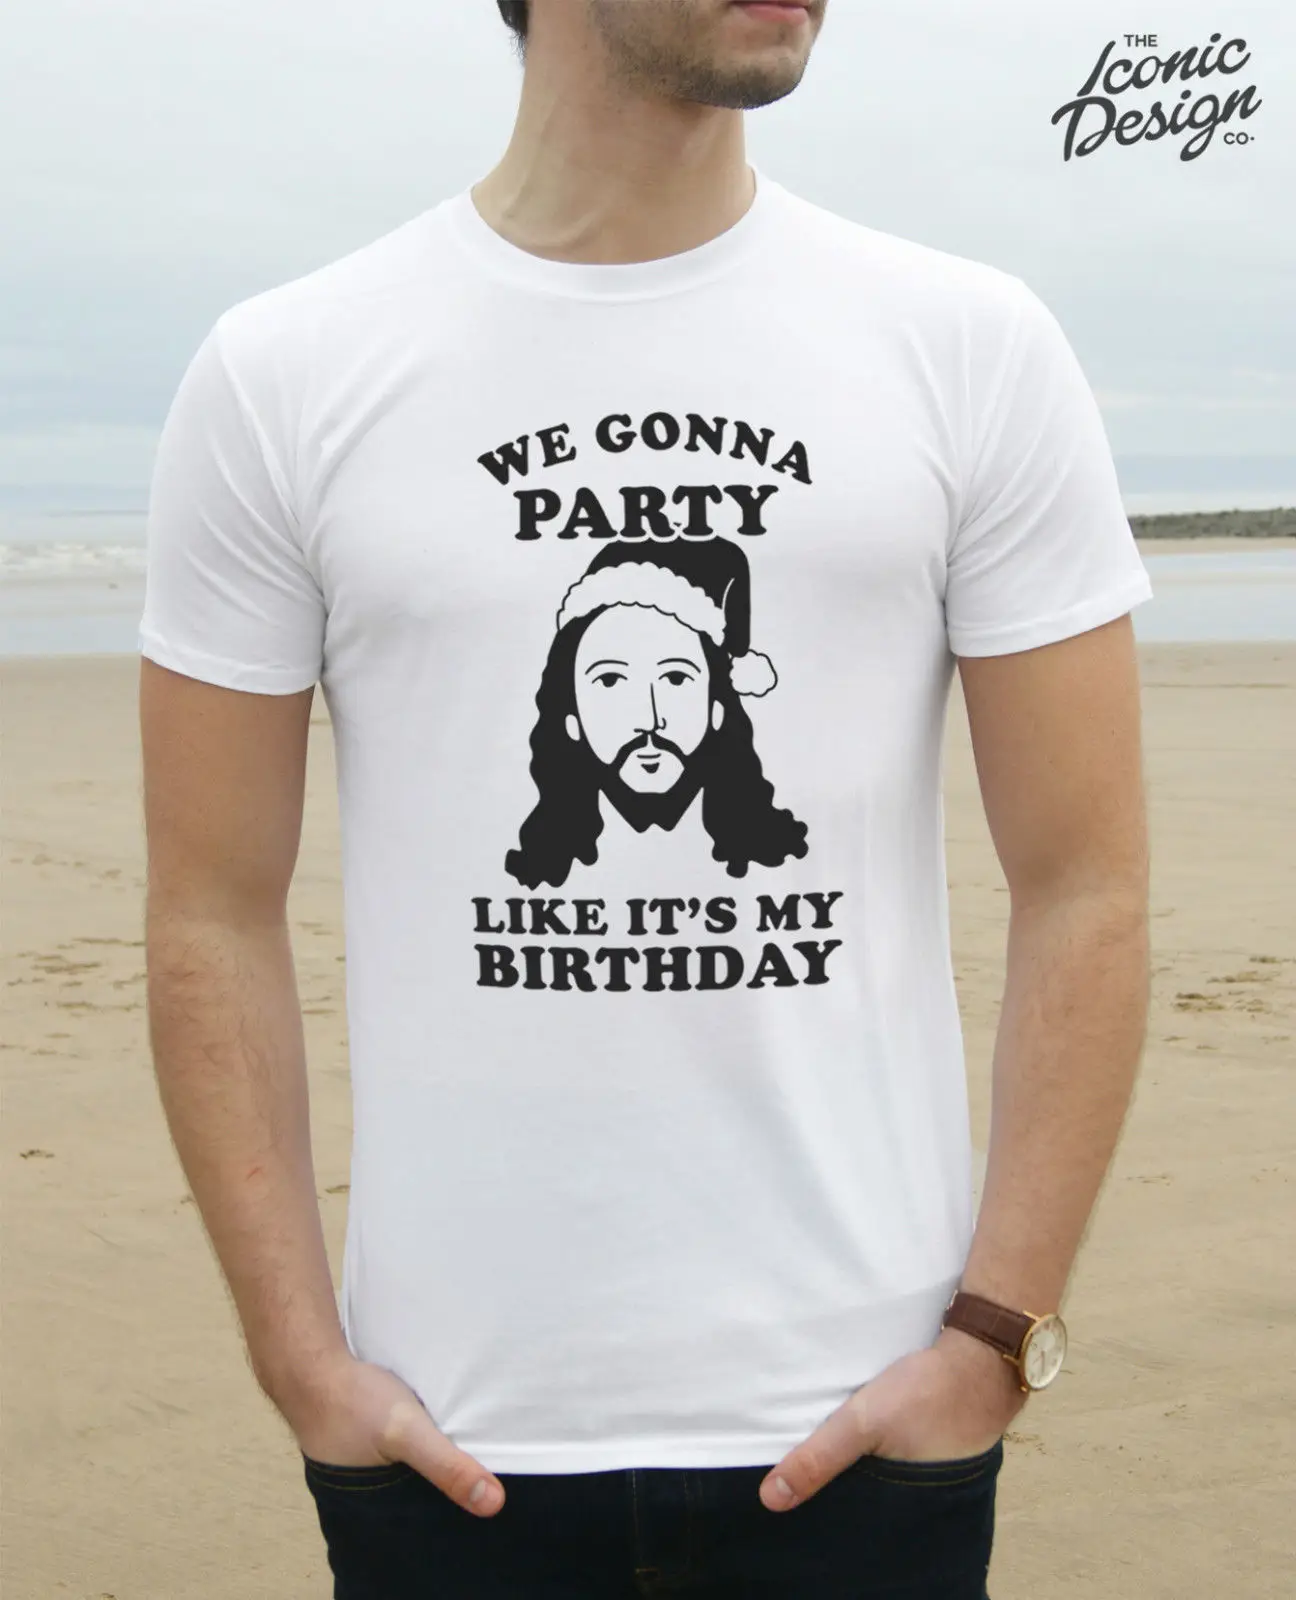 

We Gonna Party Like It's My Birthday T-shirt Gift Christmas Funny Fashion Jesus NewTee New Unisex Funny freeshipping